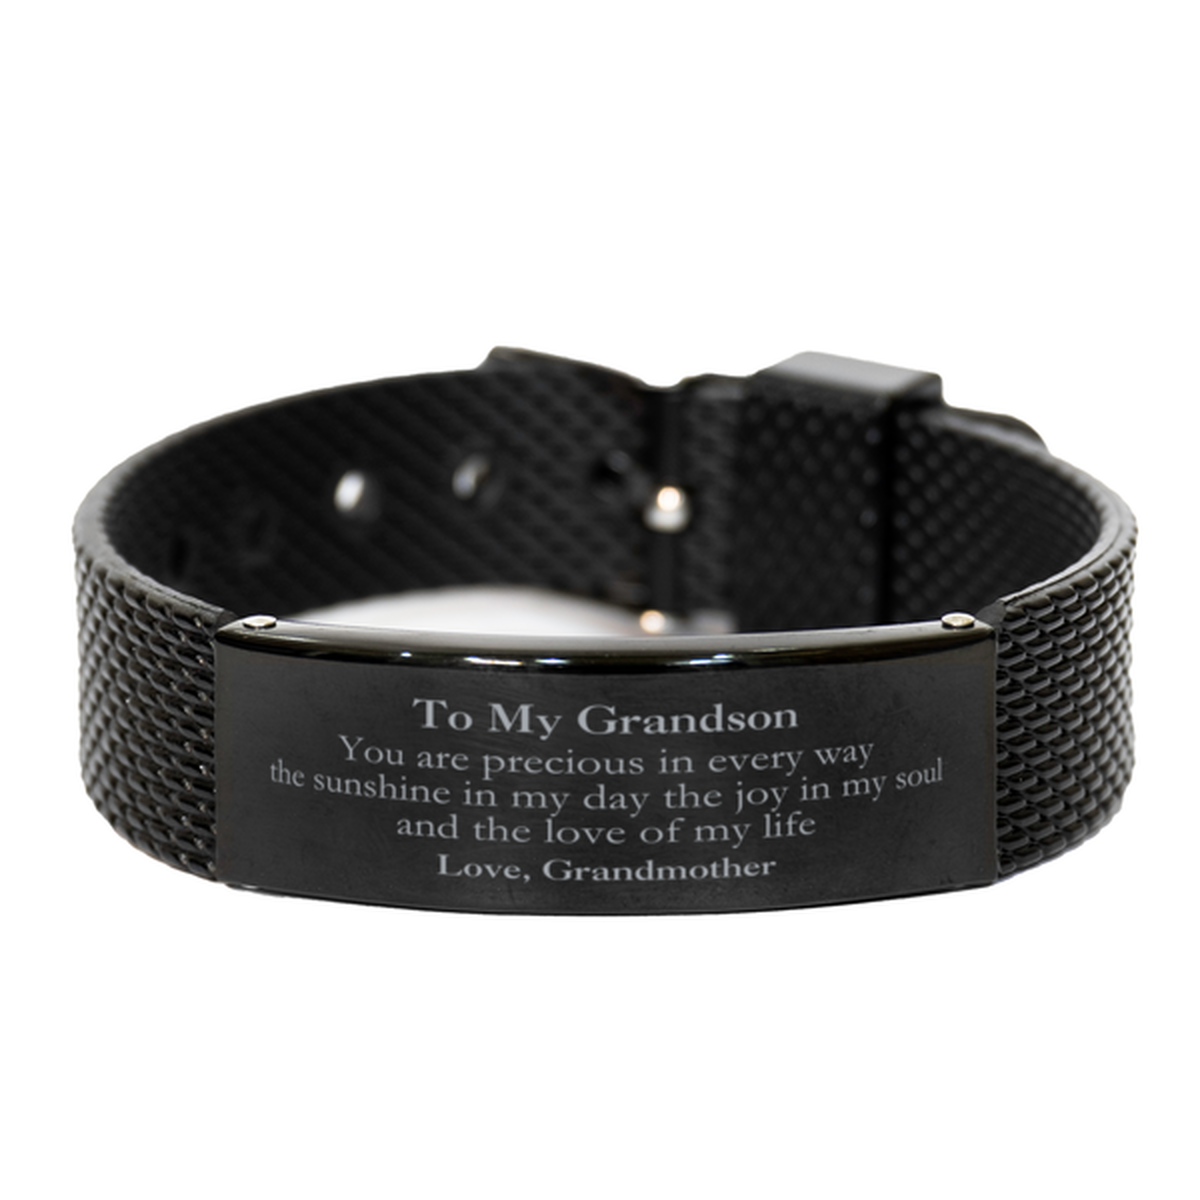 Graduation Gifts for Grandson Black Shark Mesh Bracelet Present from Grandmother, Christmas Grandson Birthday Gifts Grandson You are precious in every way the sunshine in my day. Love, Grandmother